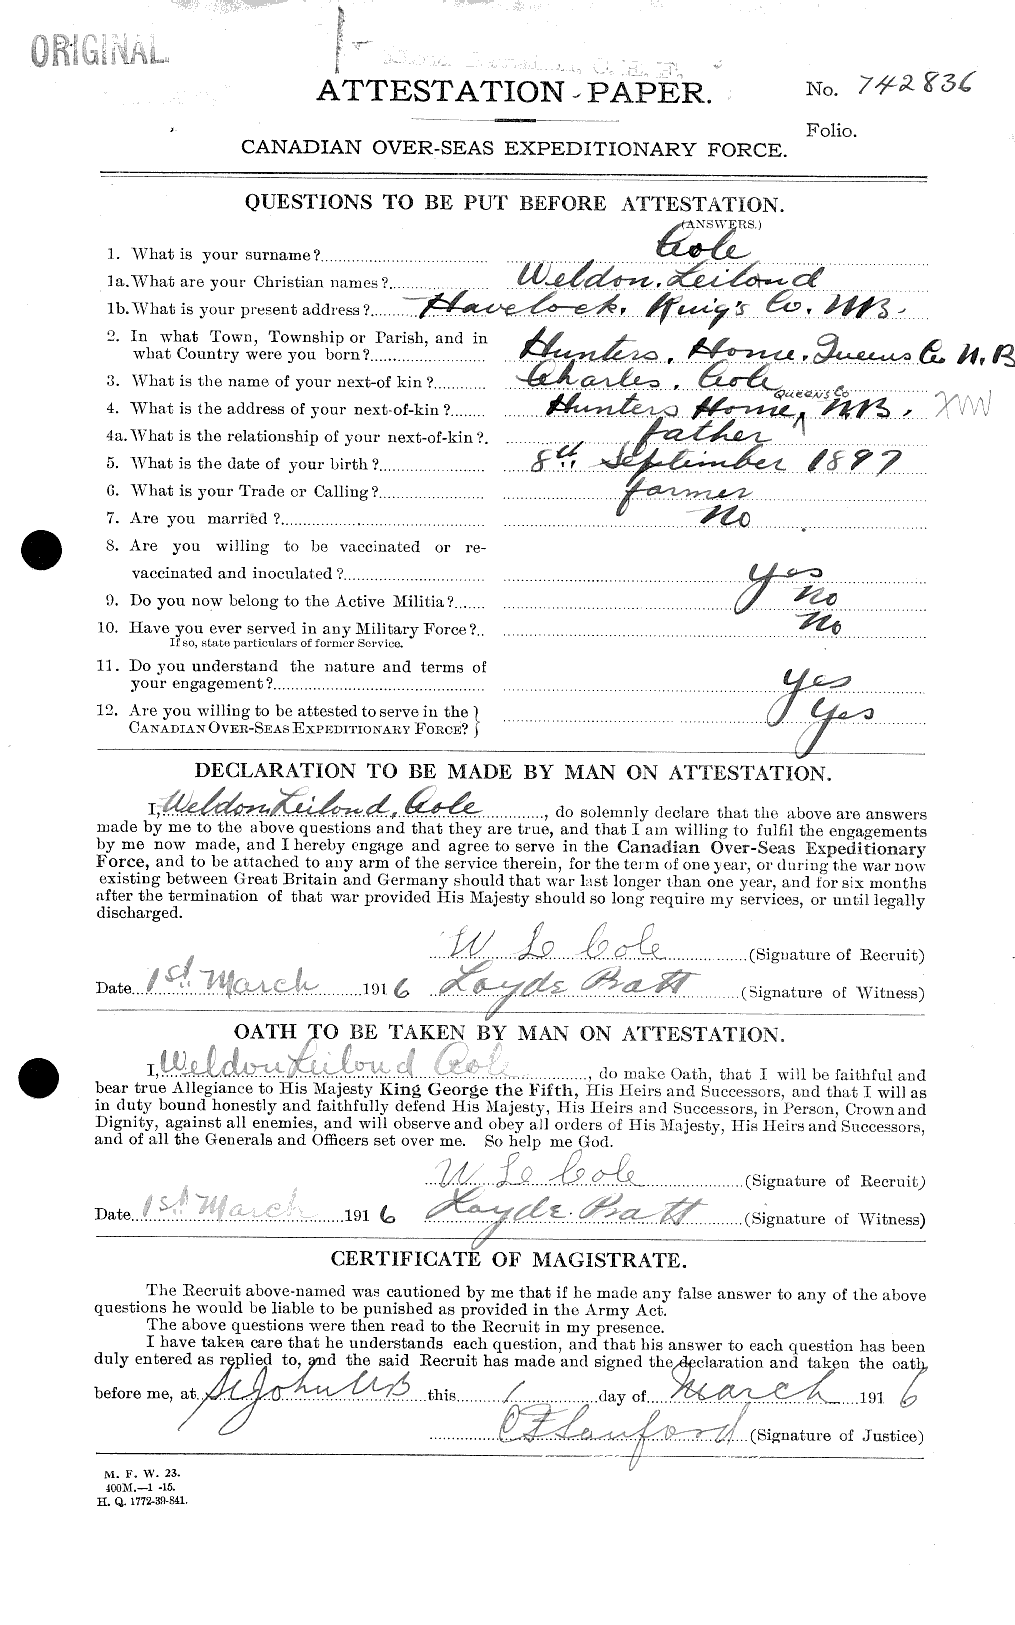 Personnel Records of the First World War - CEF 027980a